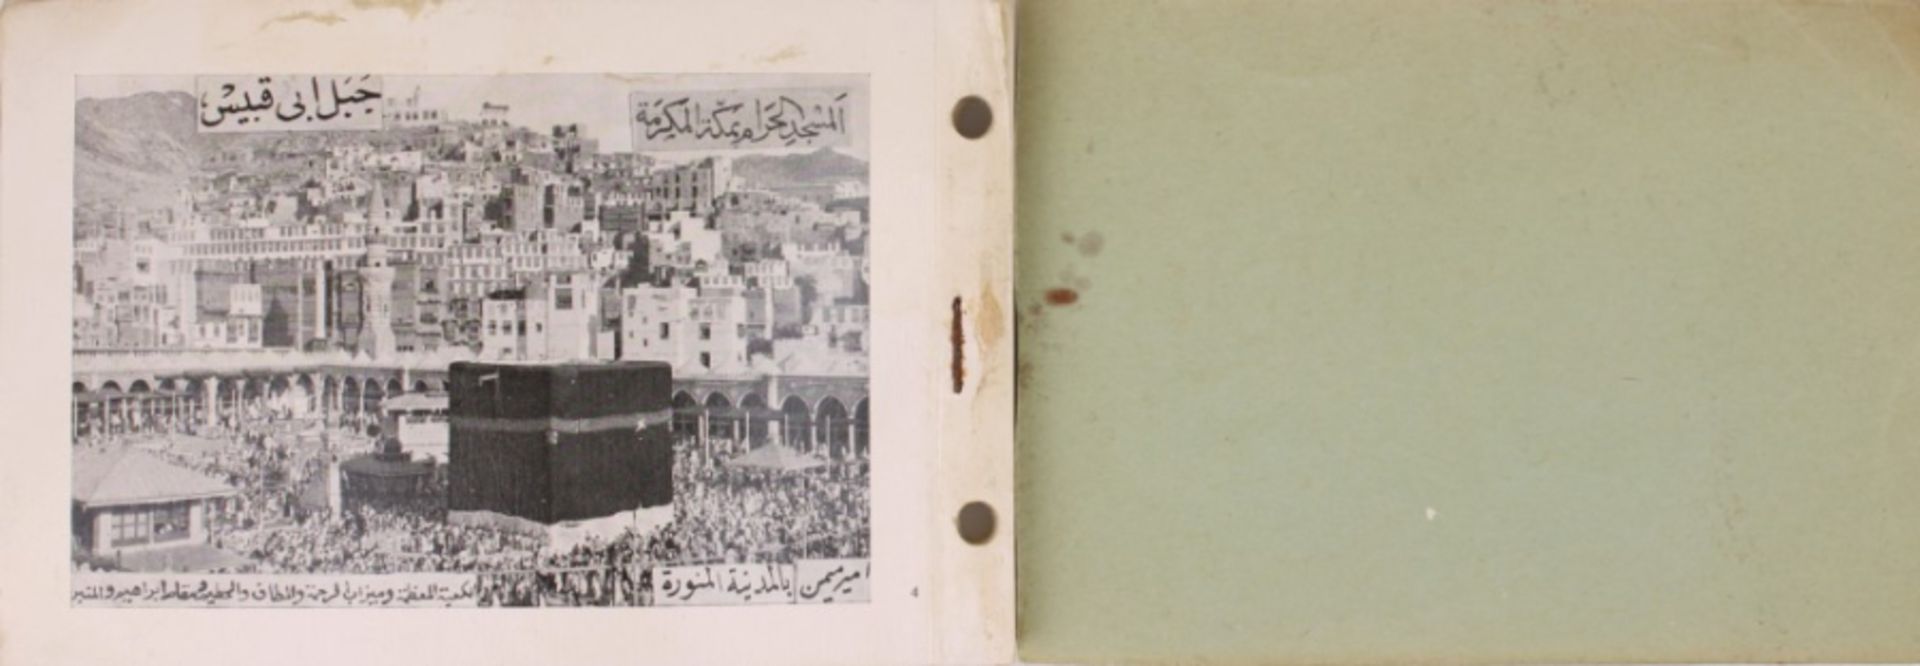 1930 Album with photographs of Mecca - Image 13 of 24